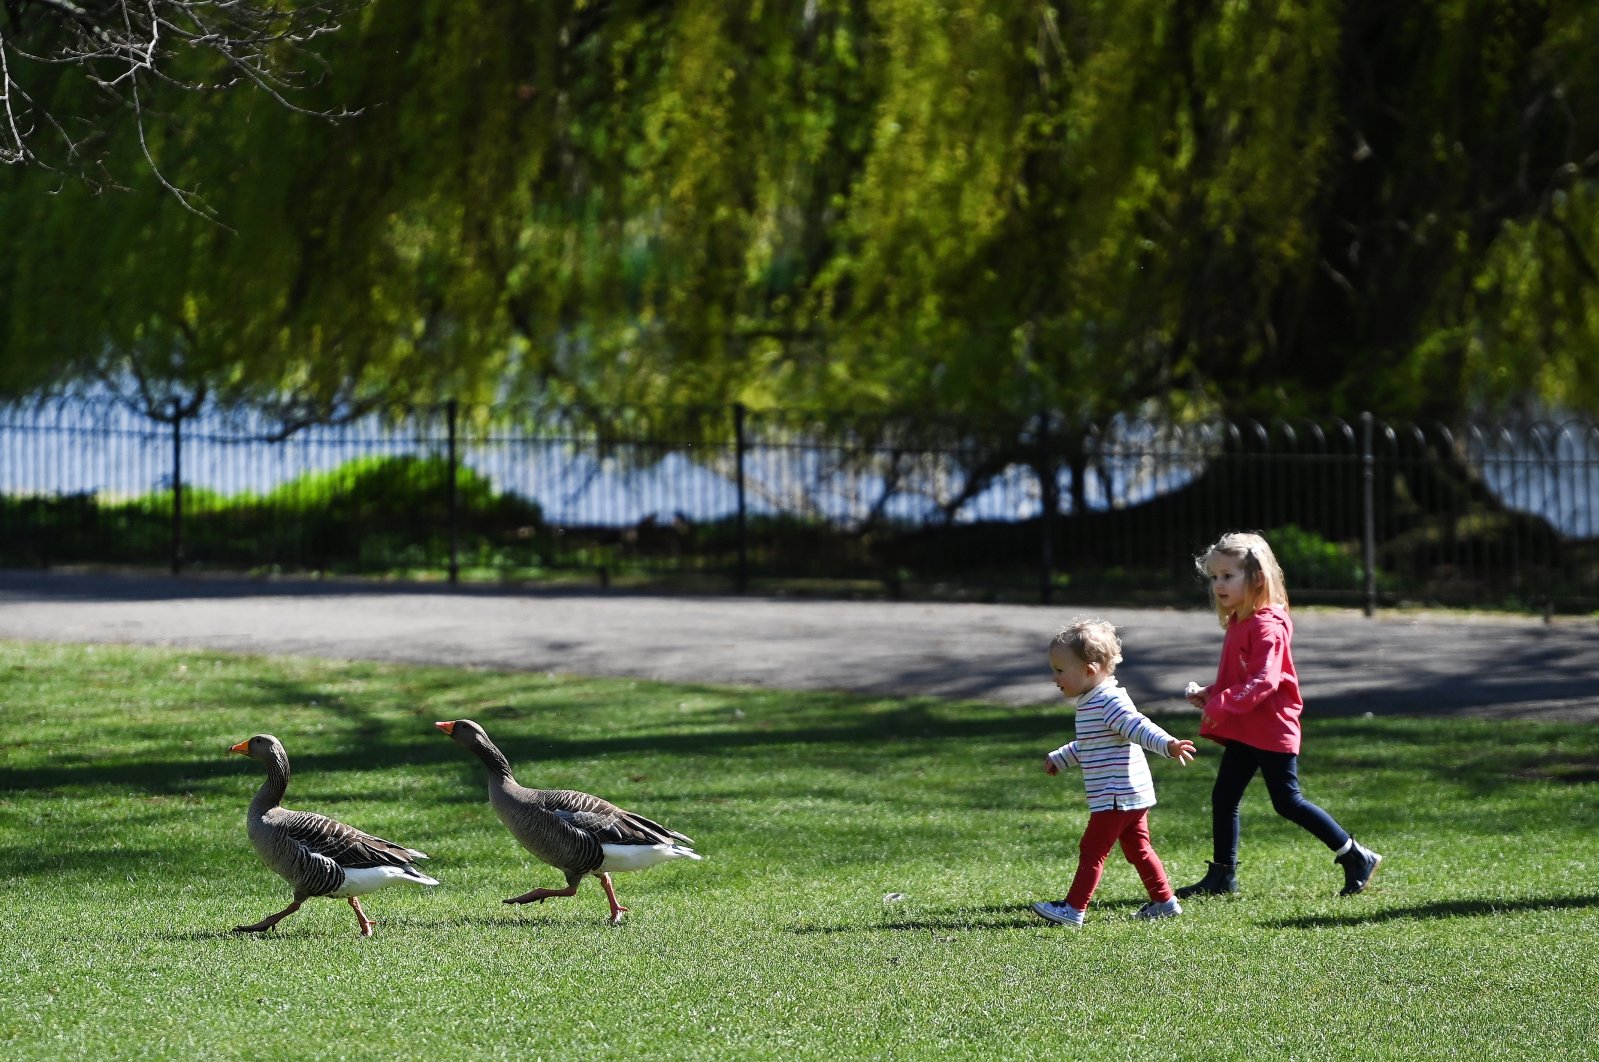 Children chase geese at St. James's Park in London, Britain, March 29, 2021. (EPA Photo)